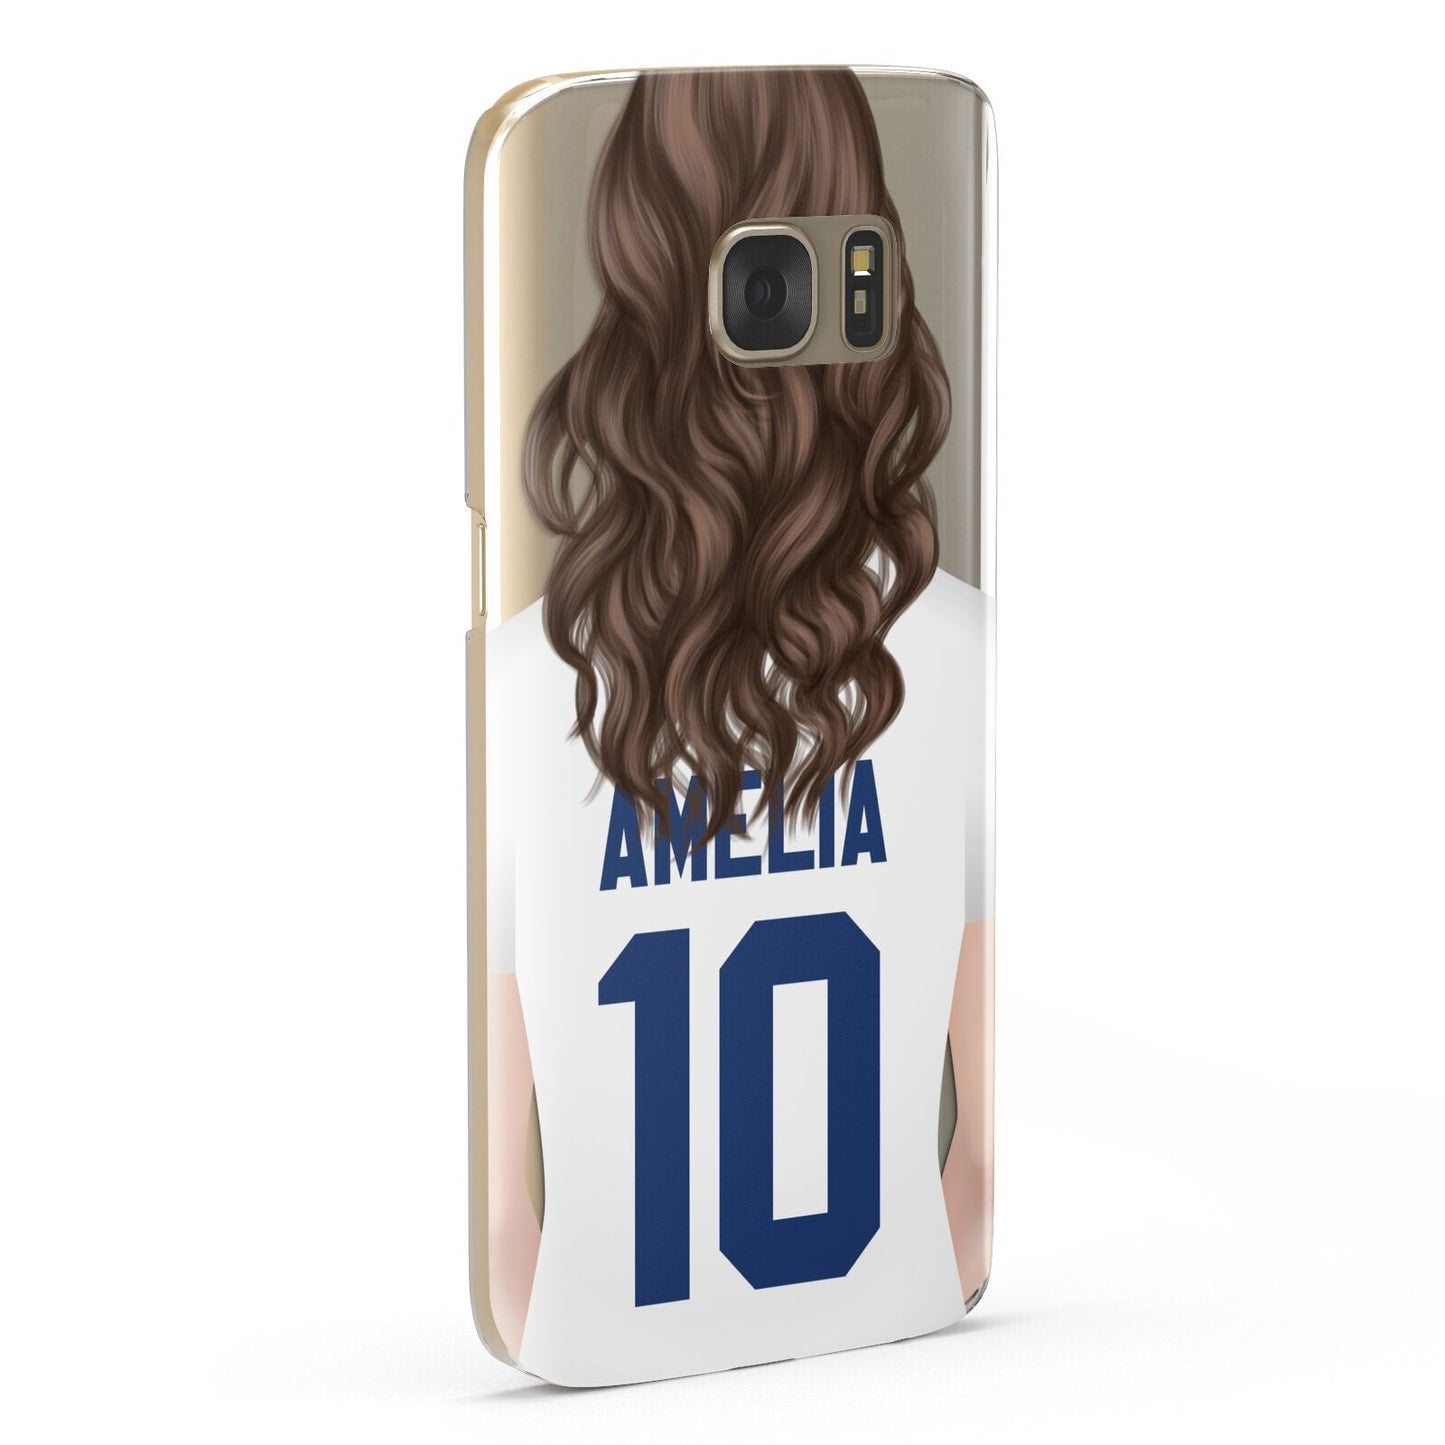 Womens Footballer Personalised Samsung Galaxy Case Fourty Five Degrees